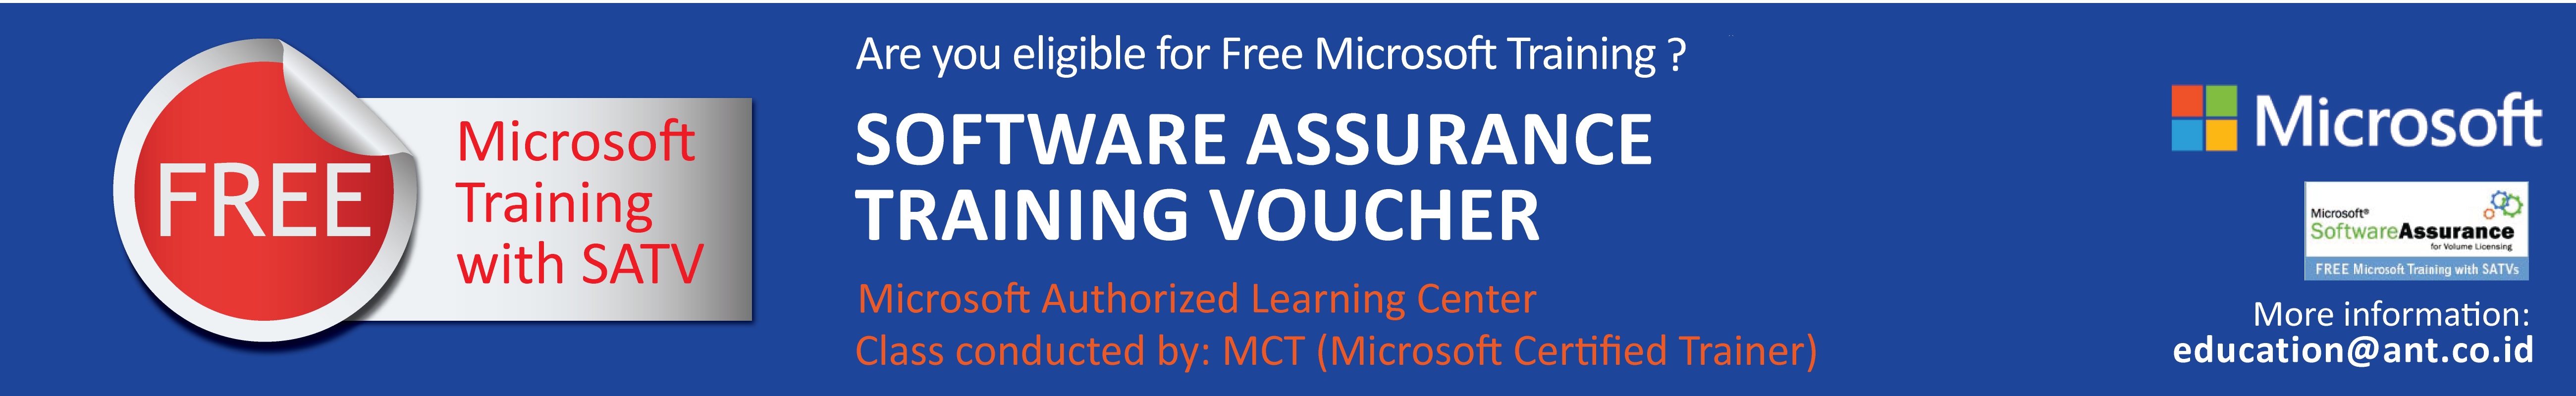 Free Trainings with Microsoft Vouchers